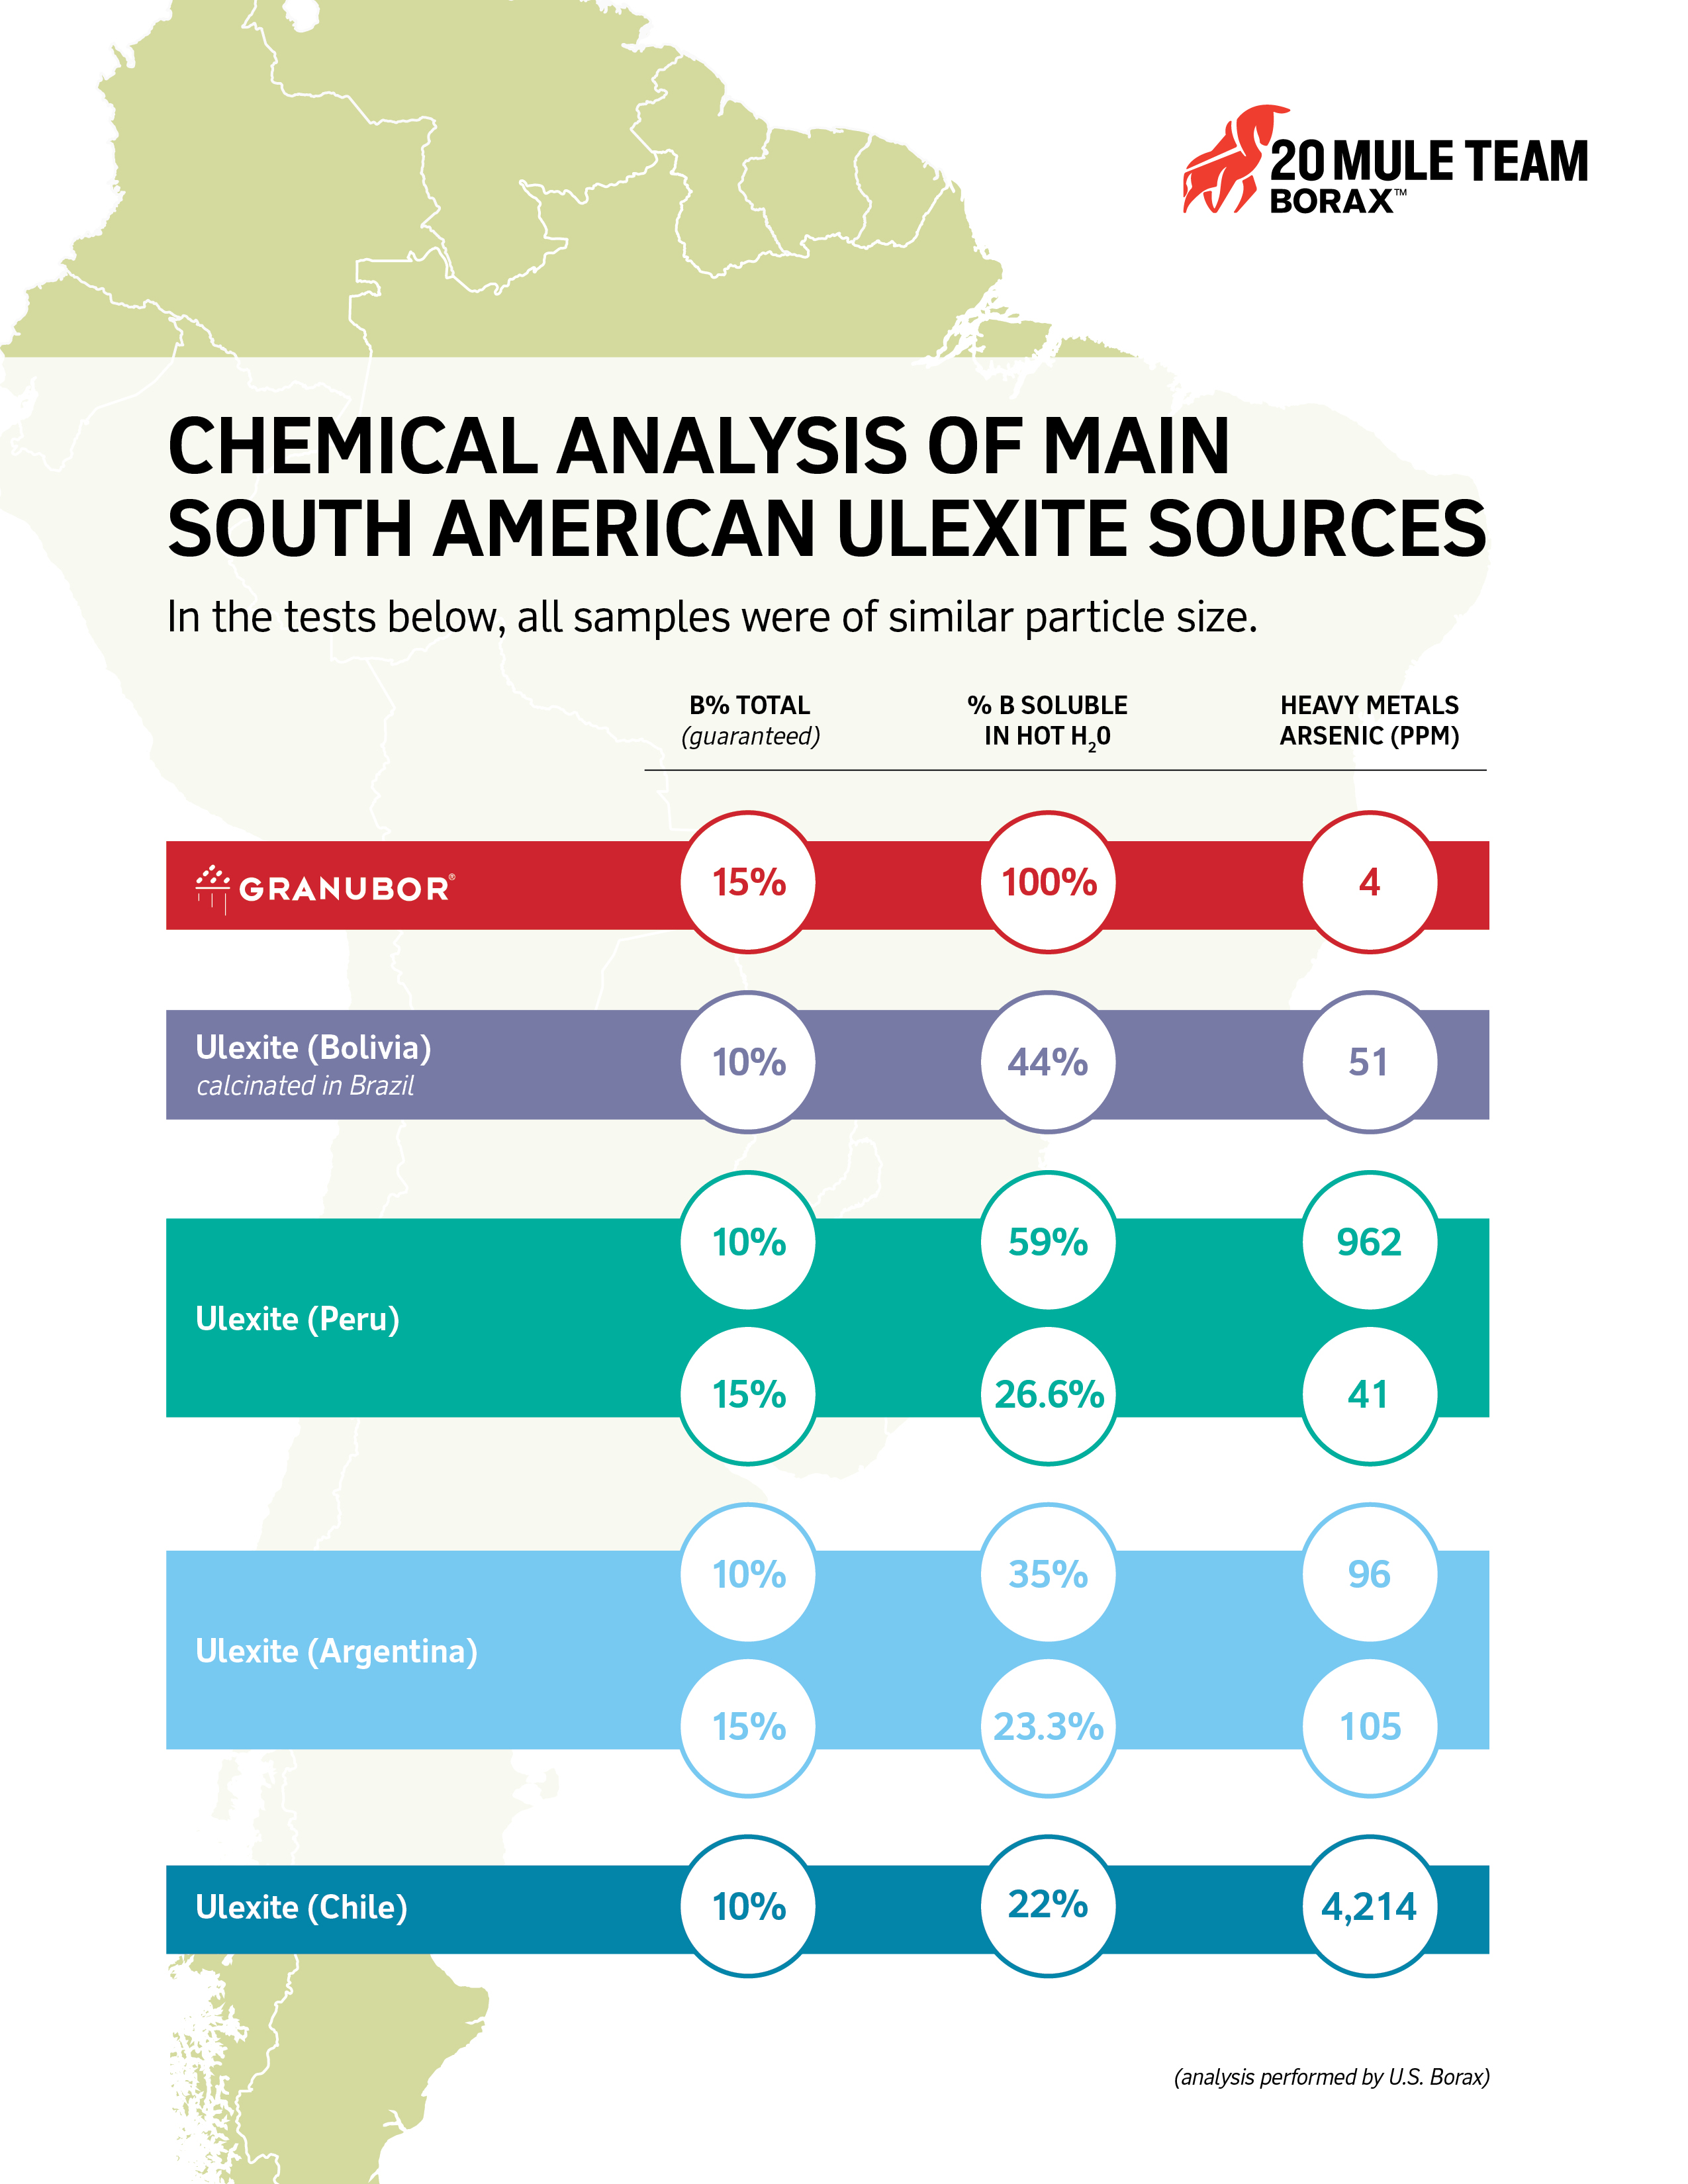 Chemical analysis of South American ulexite from Bolivia, Argentina, Peru, and Chile as compared to Granubor from U.S. Borax